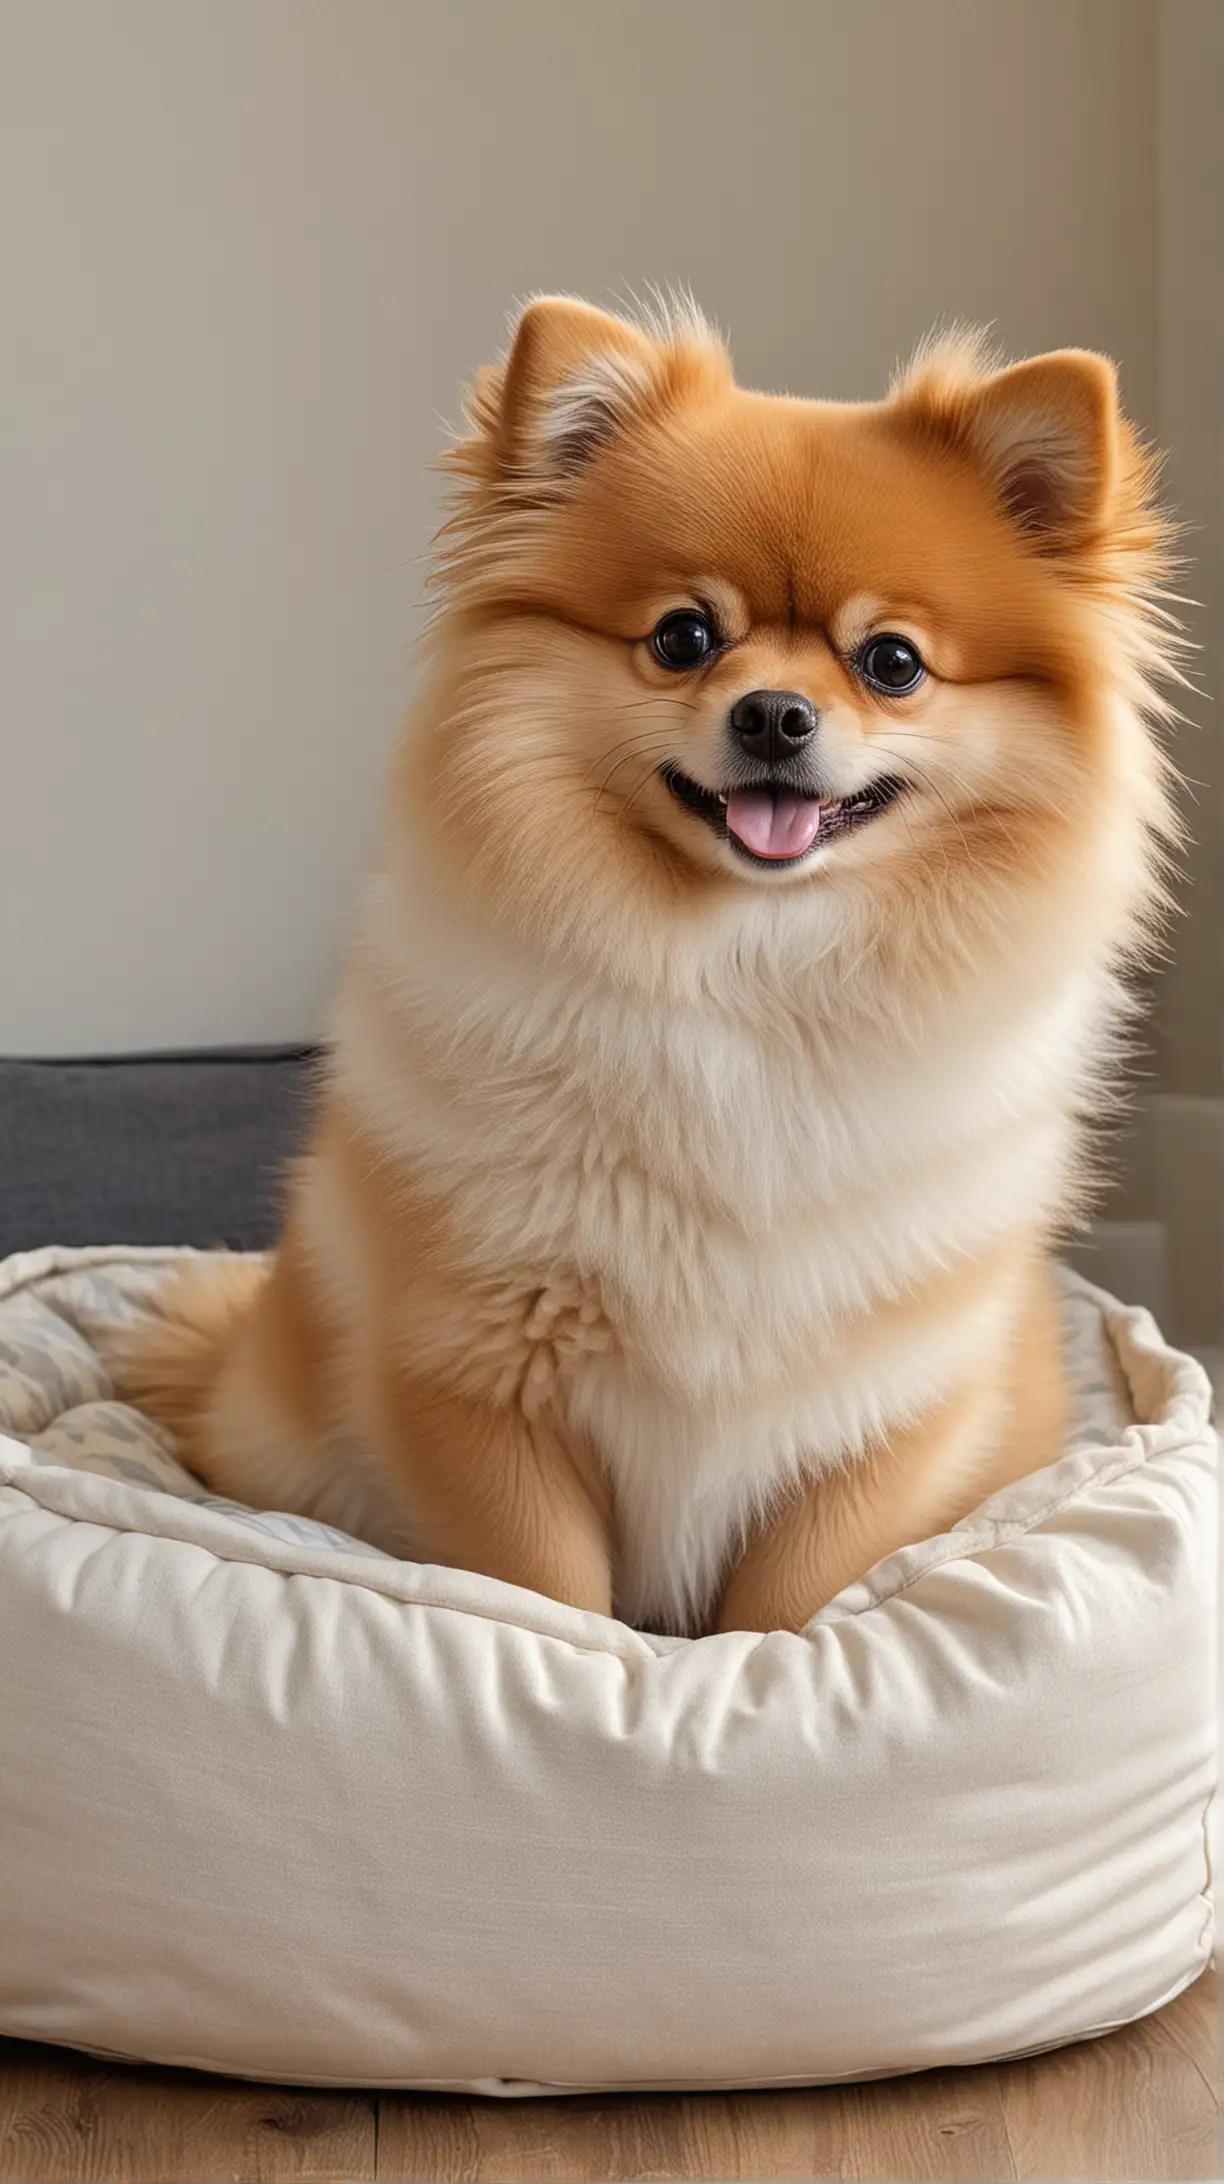 Adorable Pomeranian Dog Sitting Comfortably in His Cozy Dog Bed